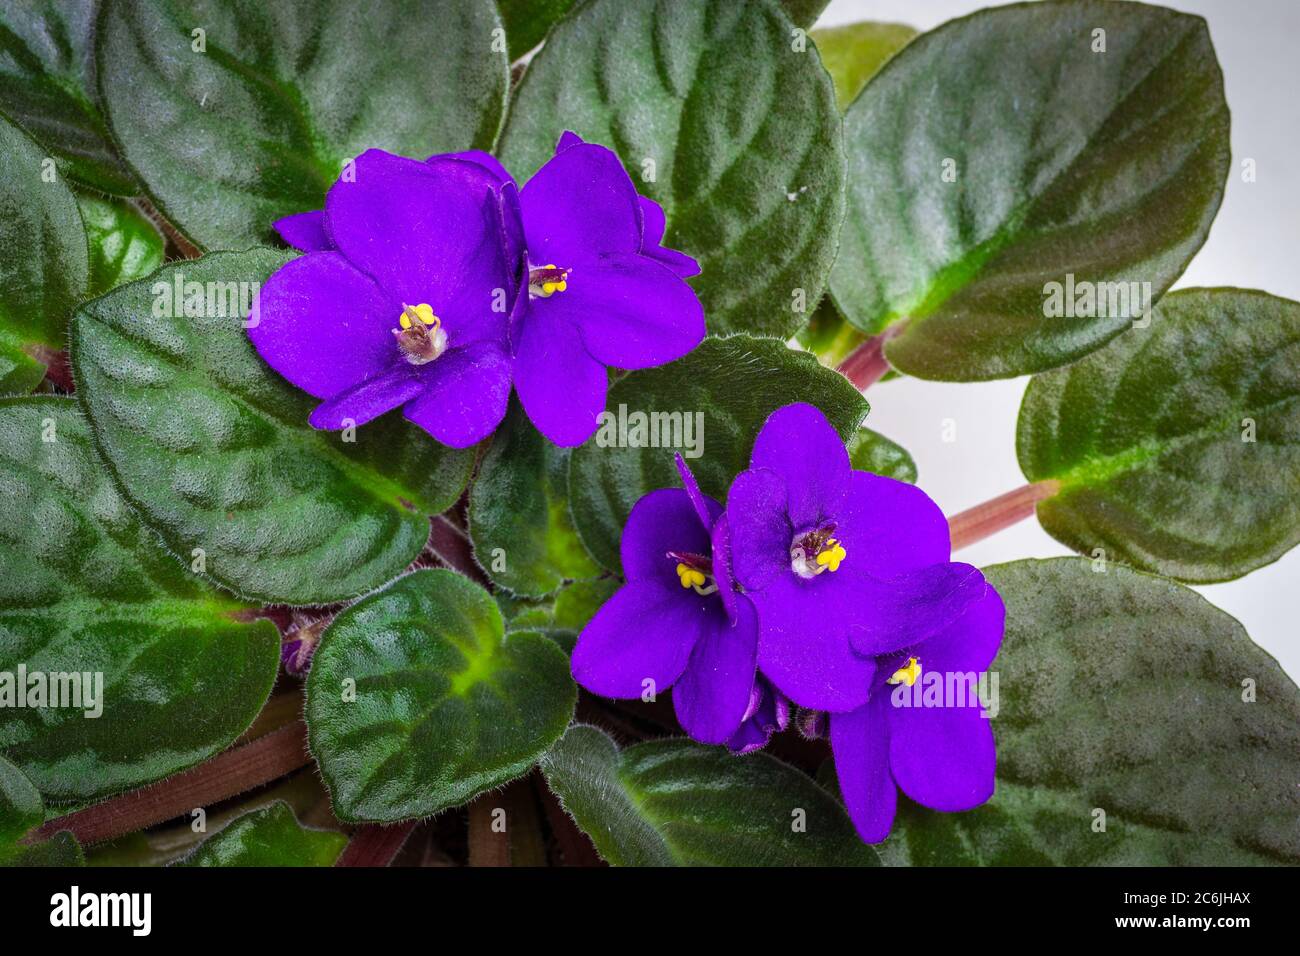 Close-up of purple African violets and their bright yellow centres and lush leaves Stock Photo